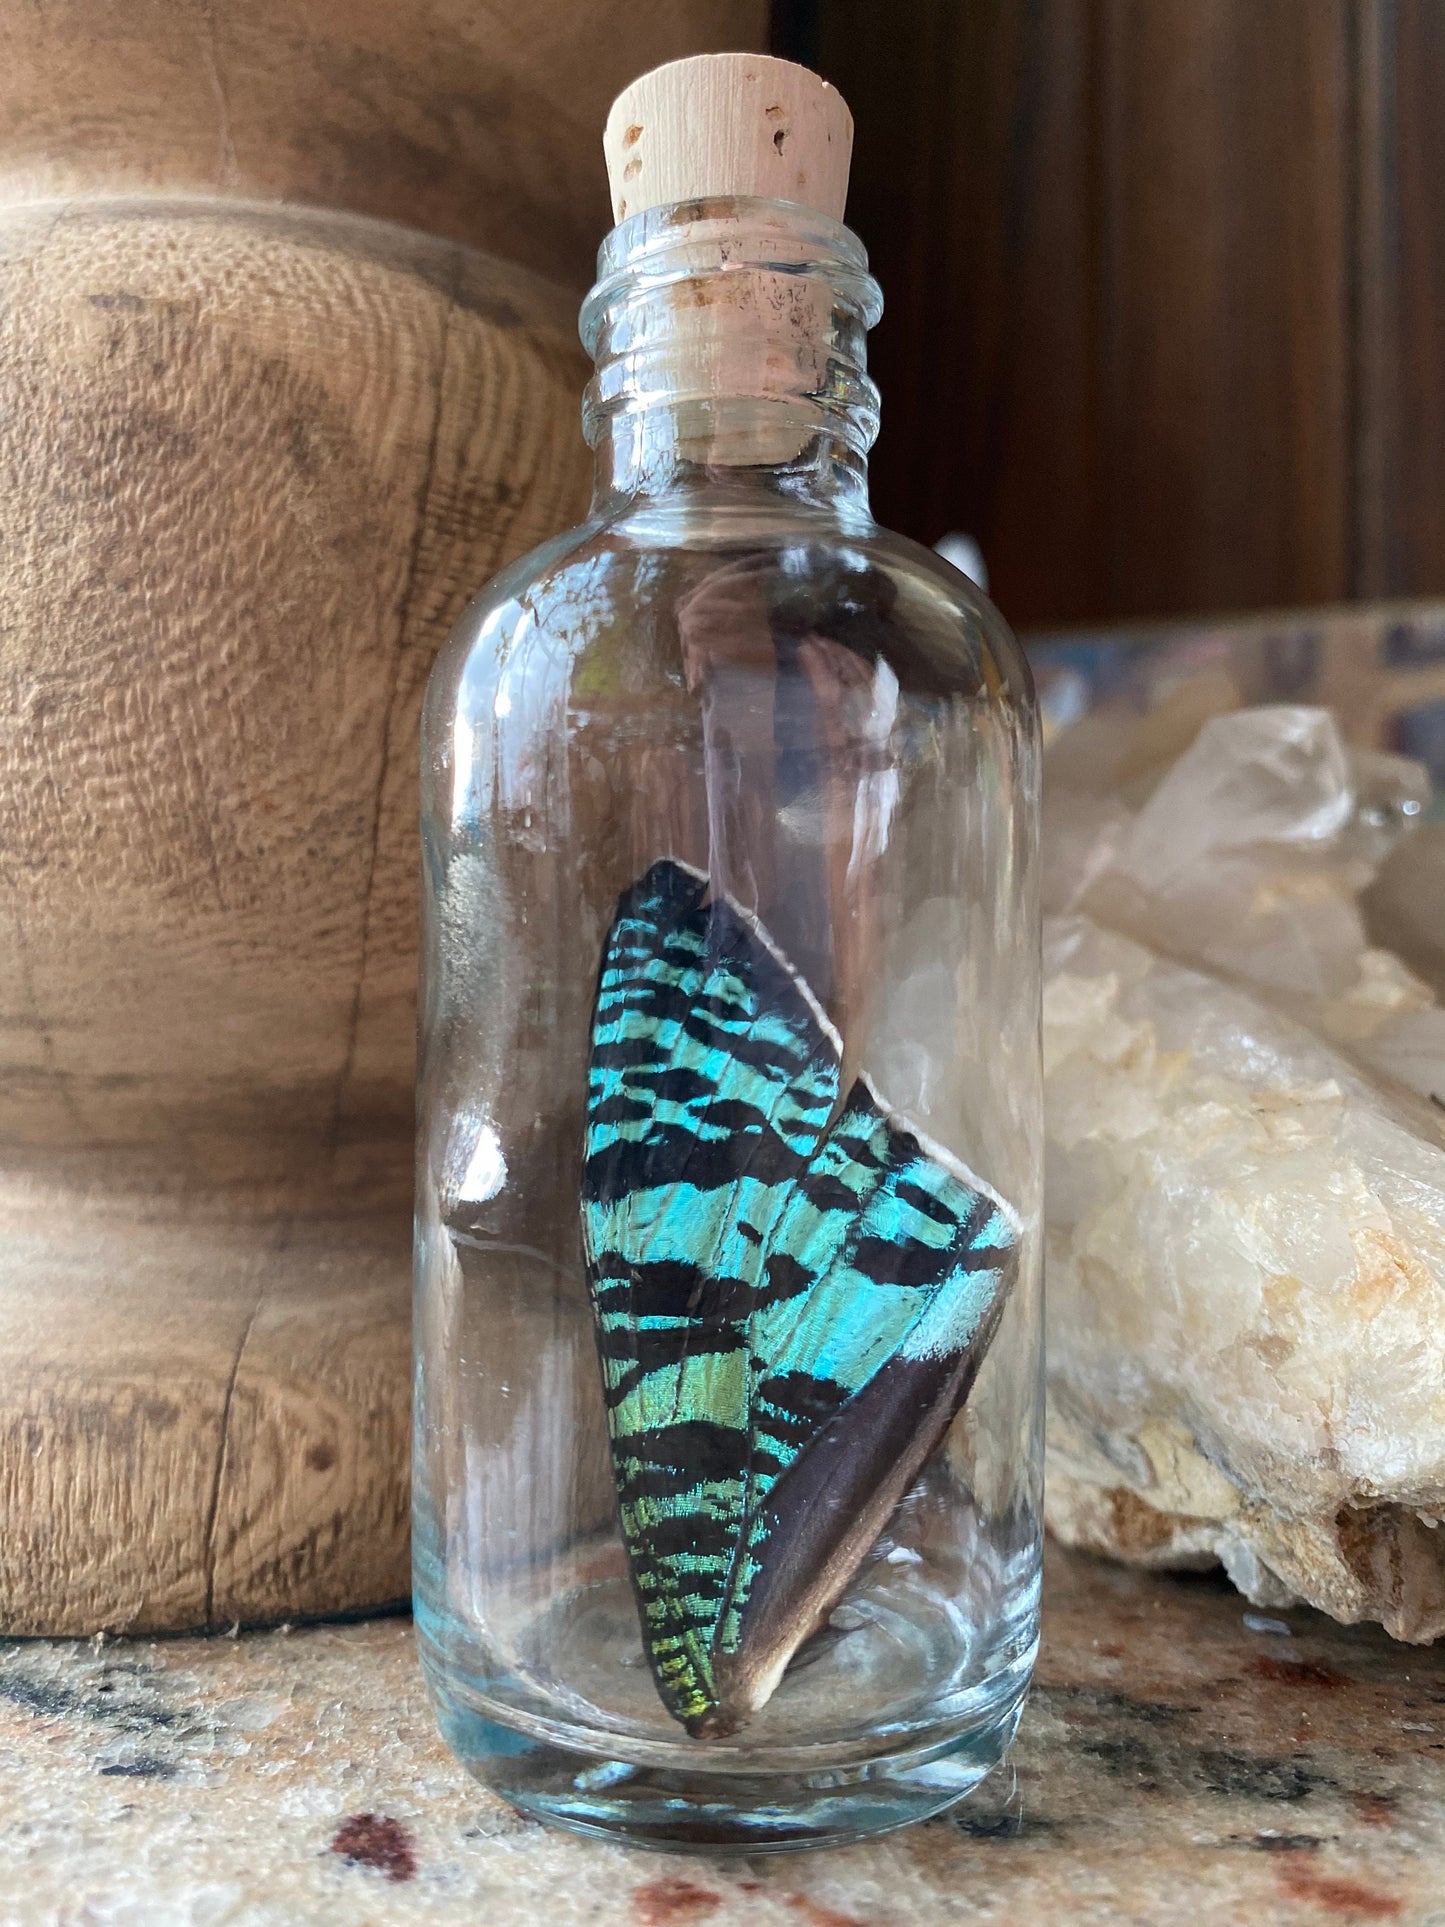 Real Butterfly Wing in Bottle XLarge Specimen Jar ethically sourced Funds Conservation